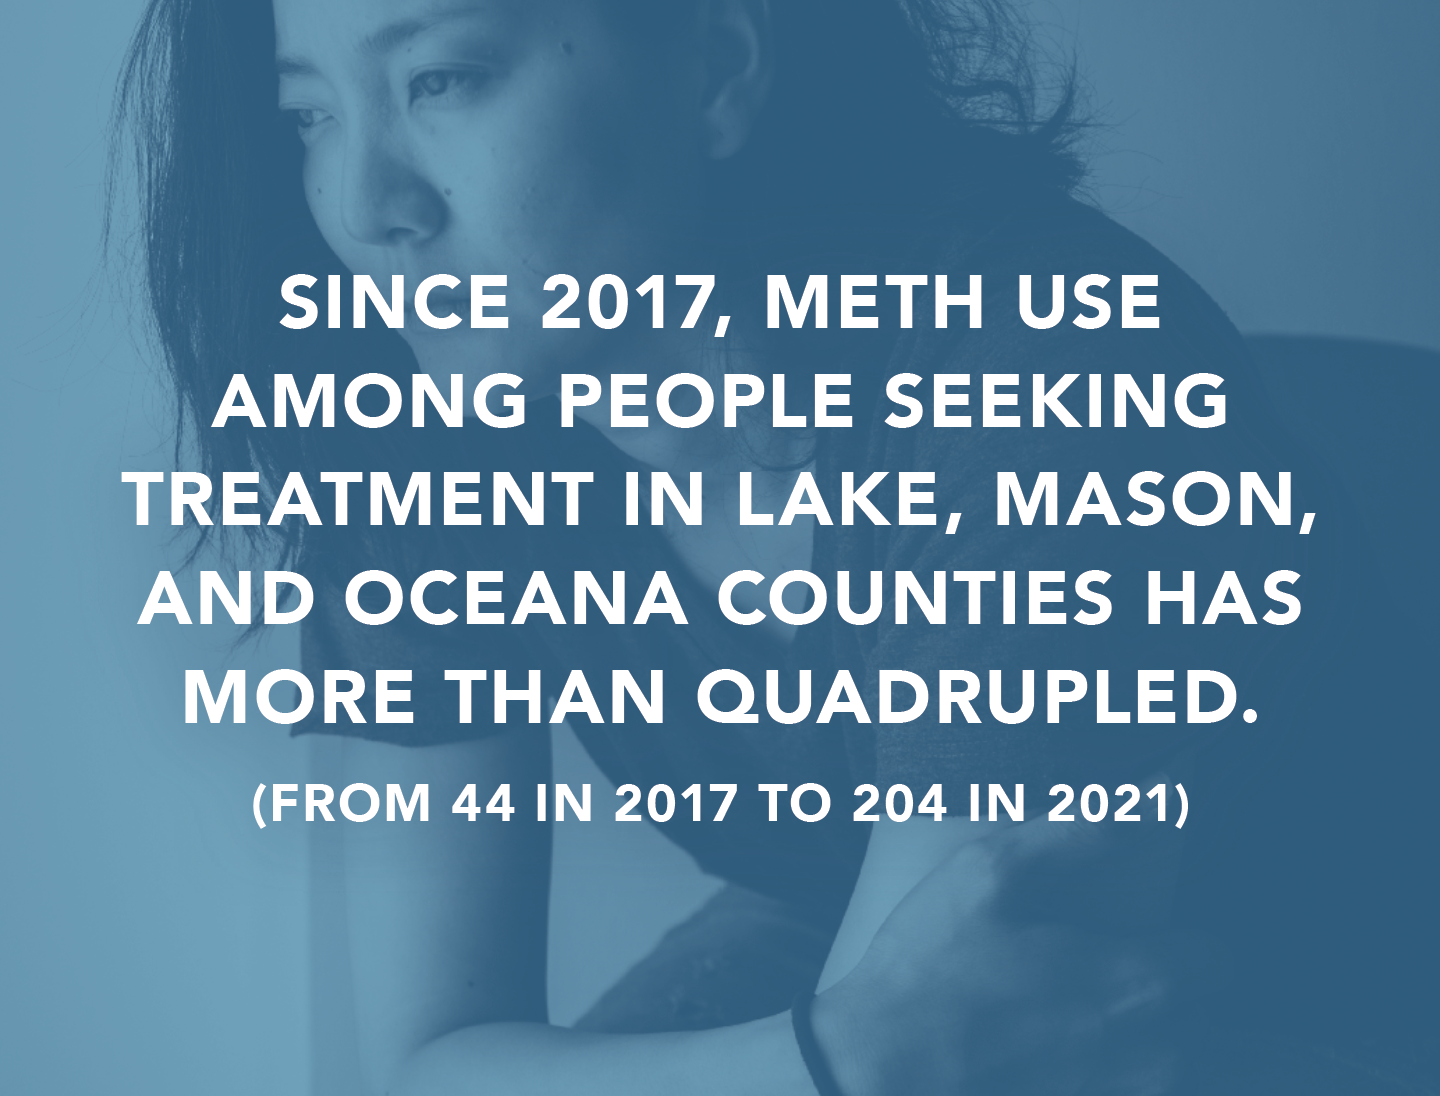 Meth use in Lake, Mason and Oceana Counties is on the rise: